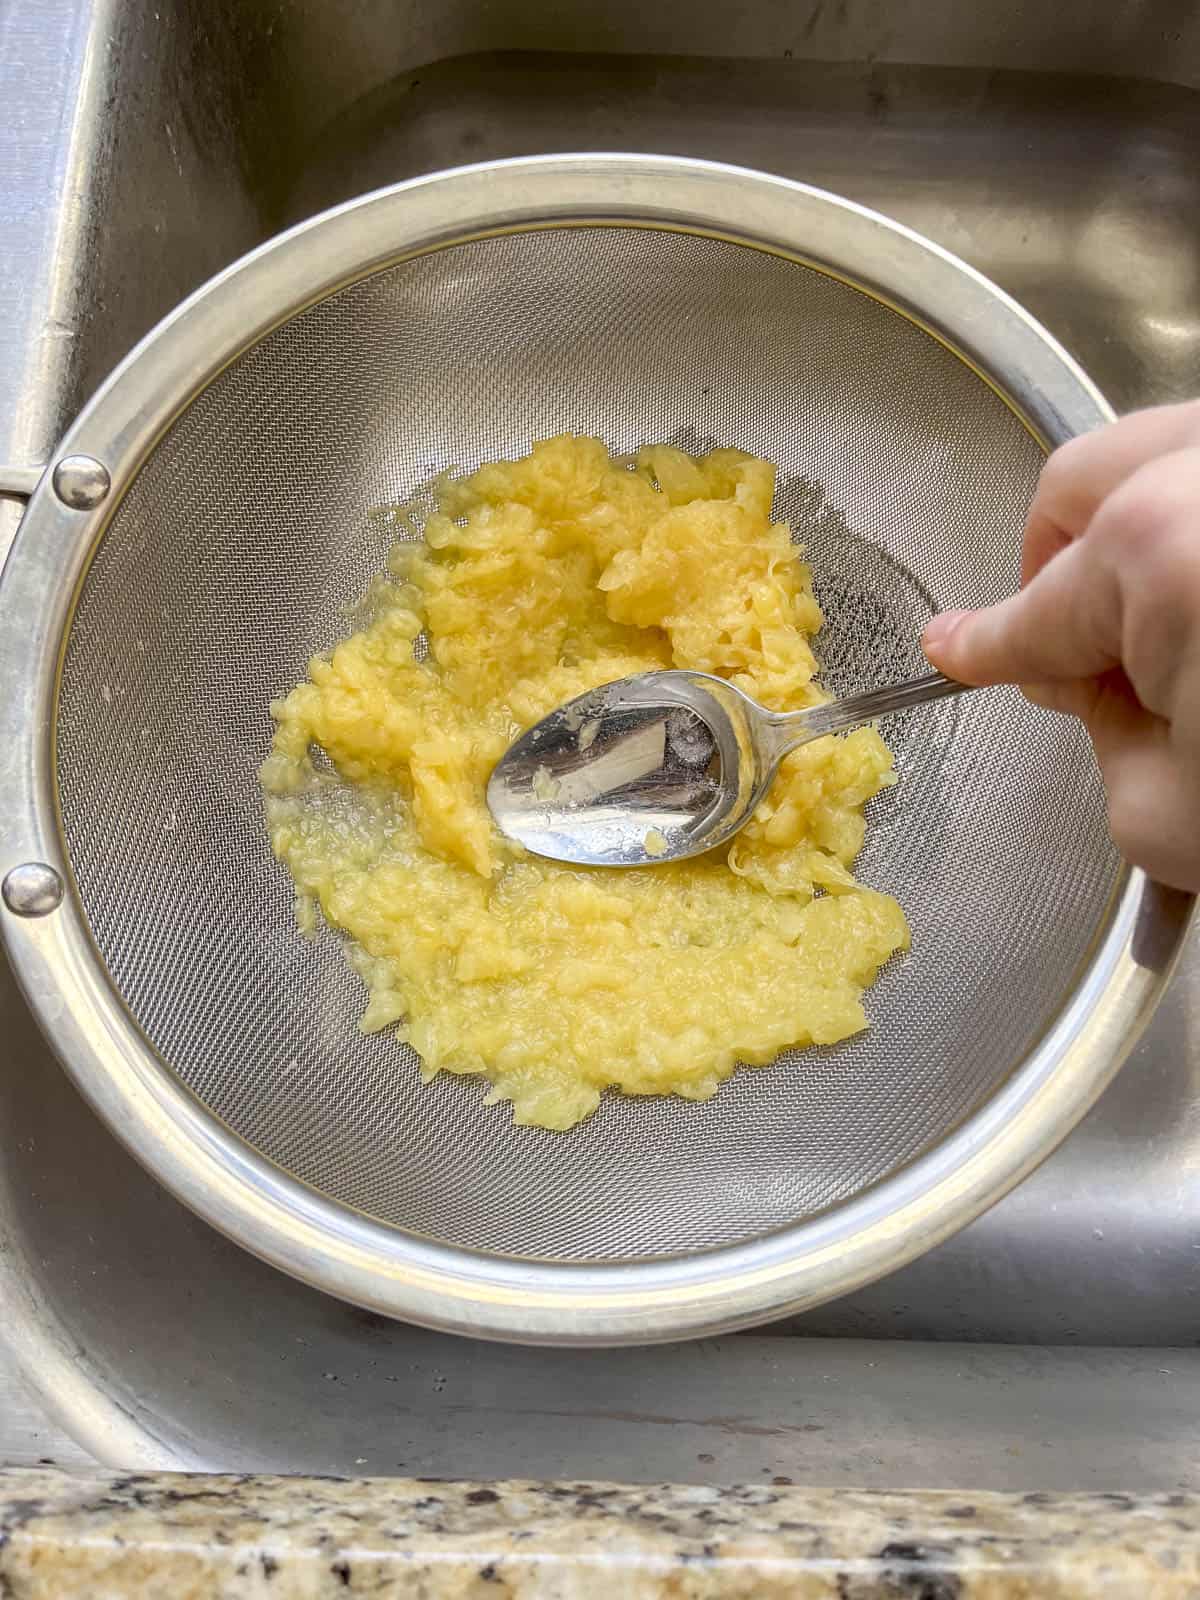 crushed pineapple in a fine mesh strainer being pressed with a spoon